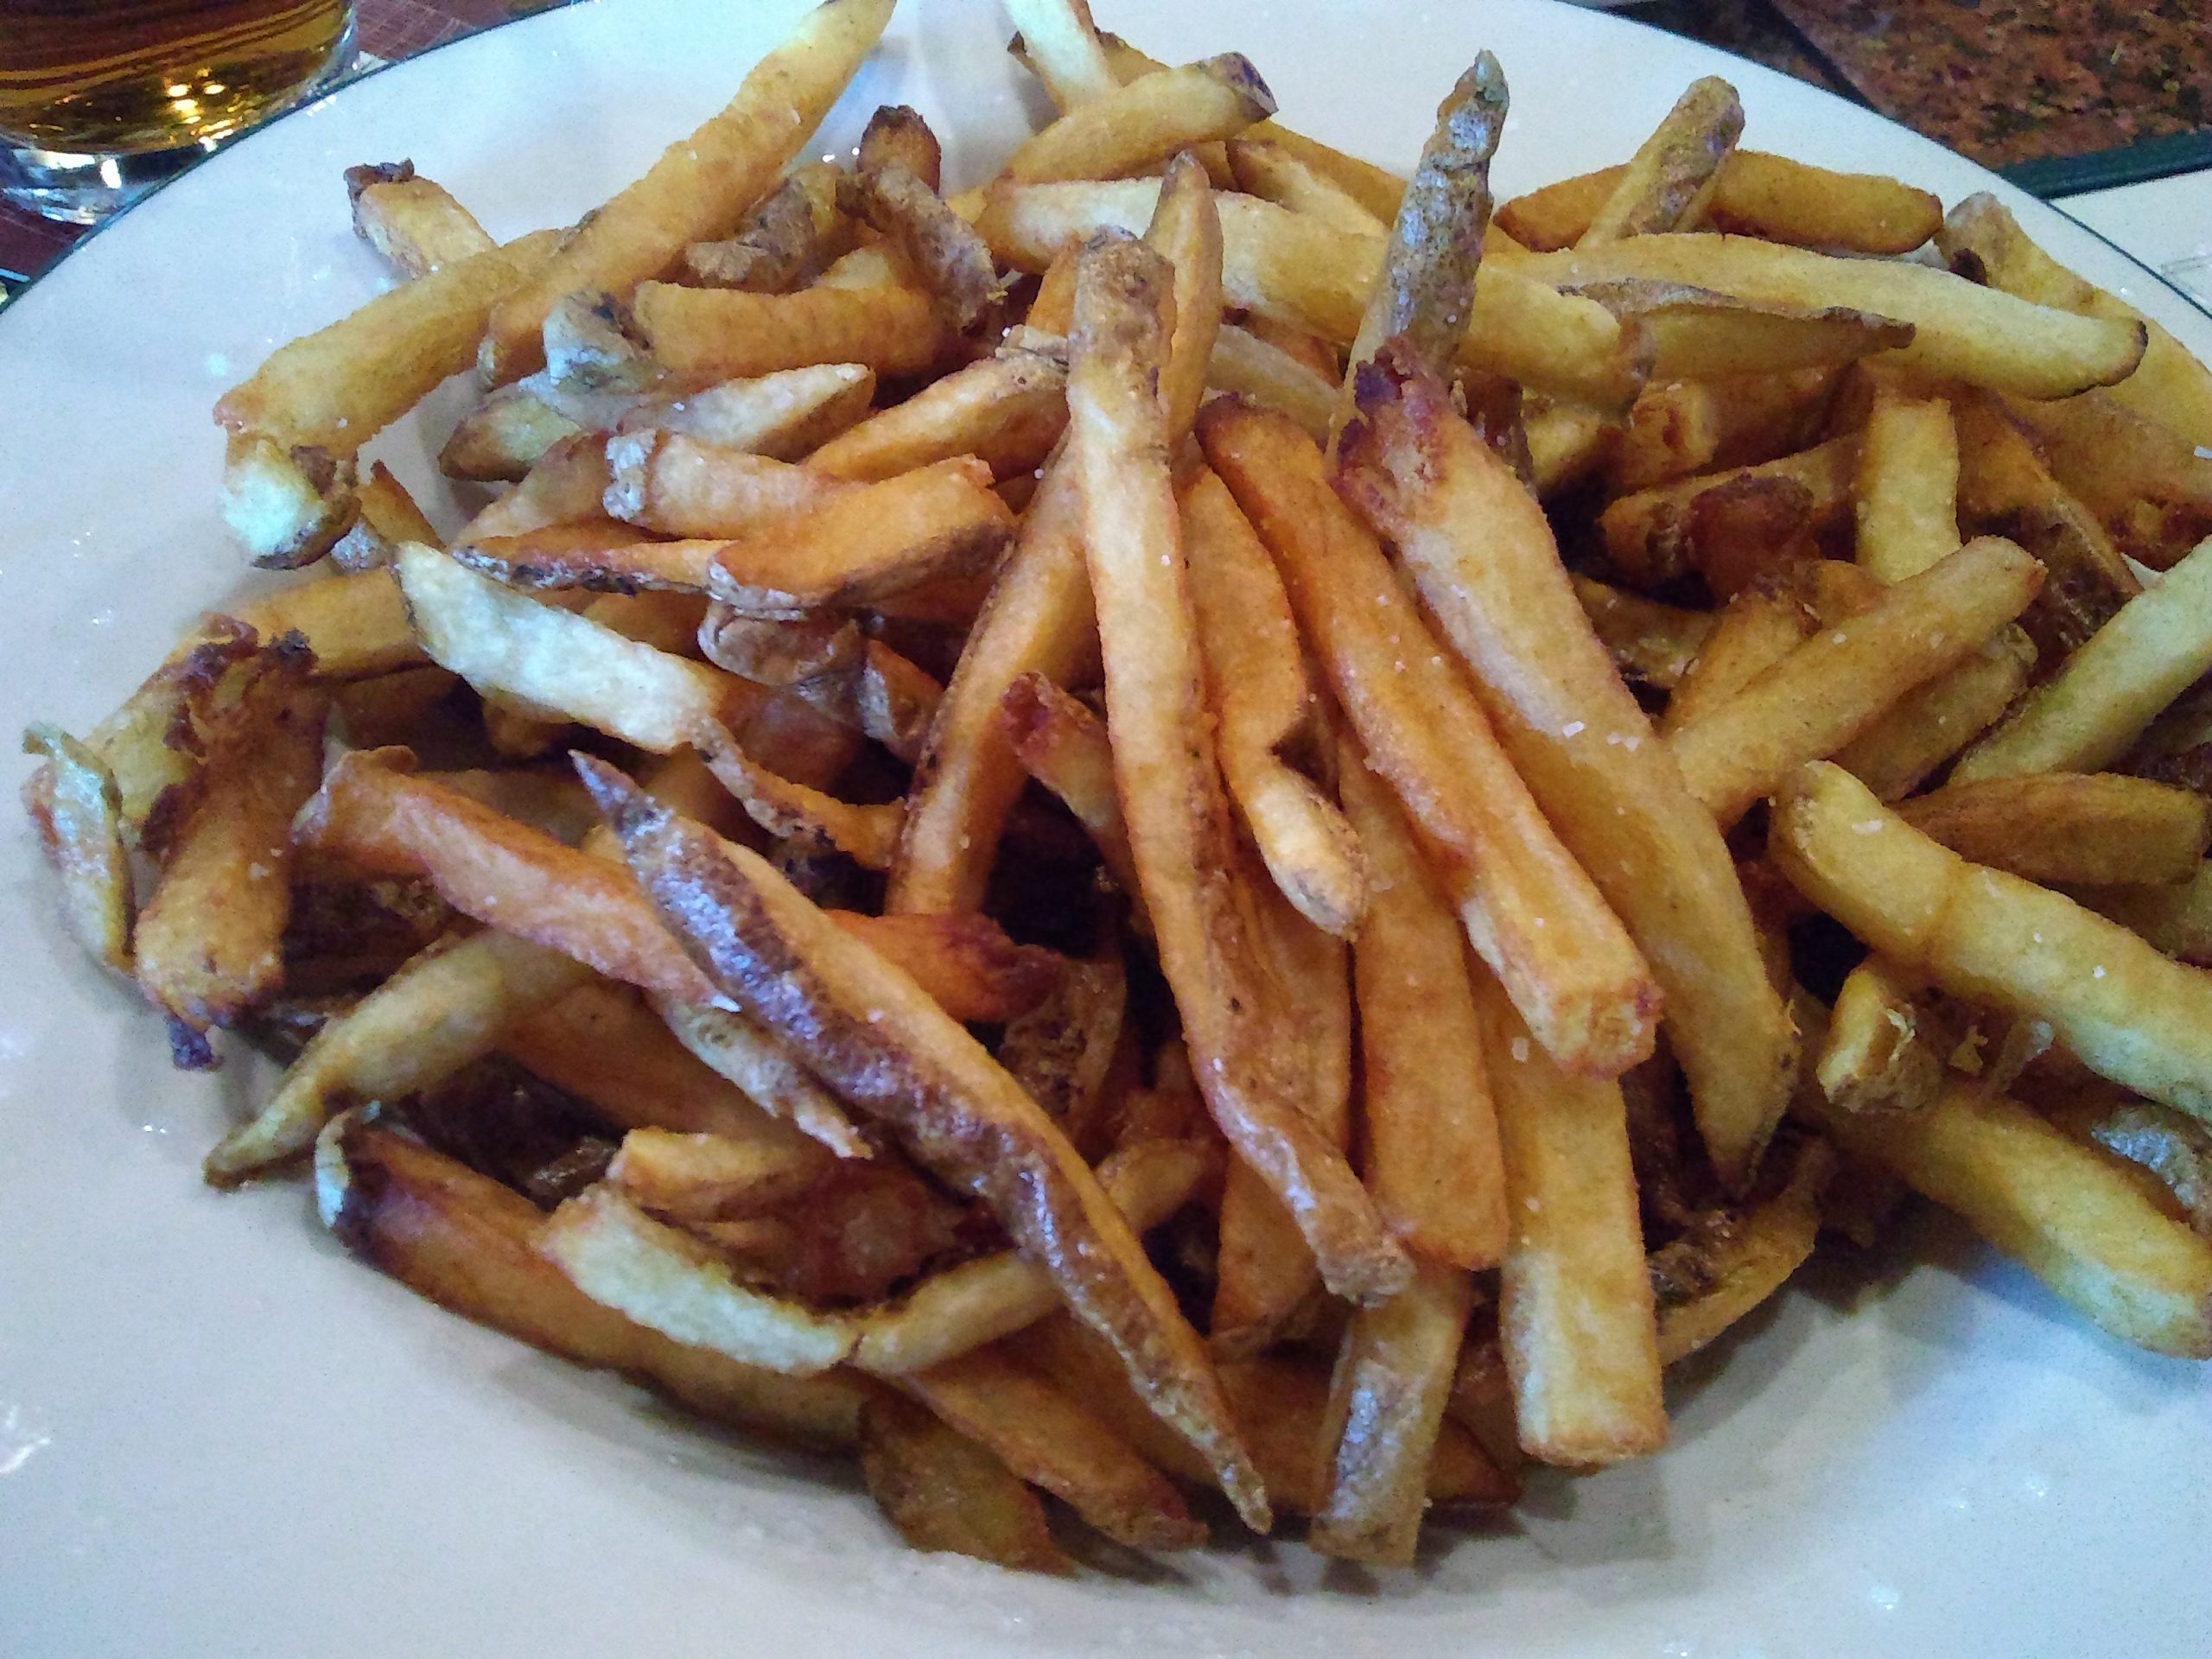 A plate of french fries with a glass of beer.